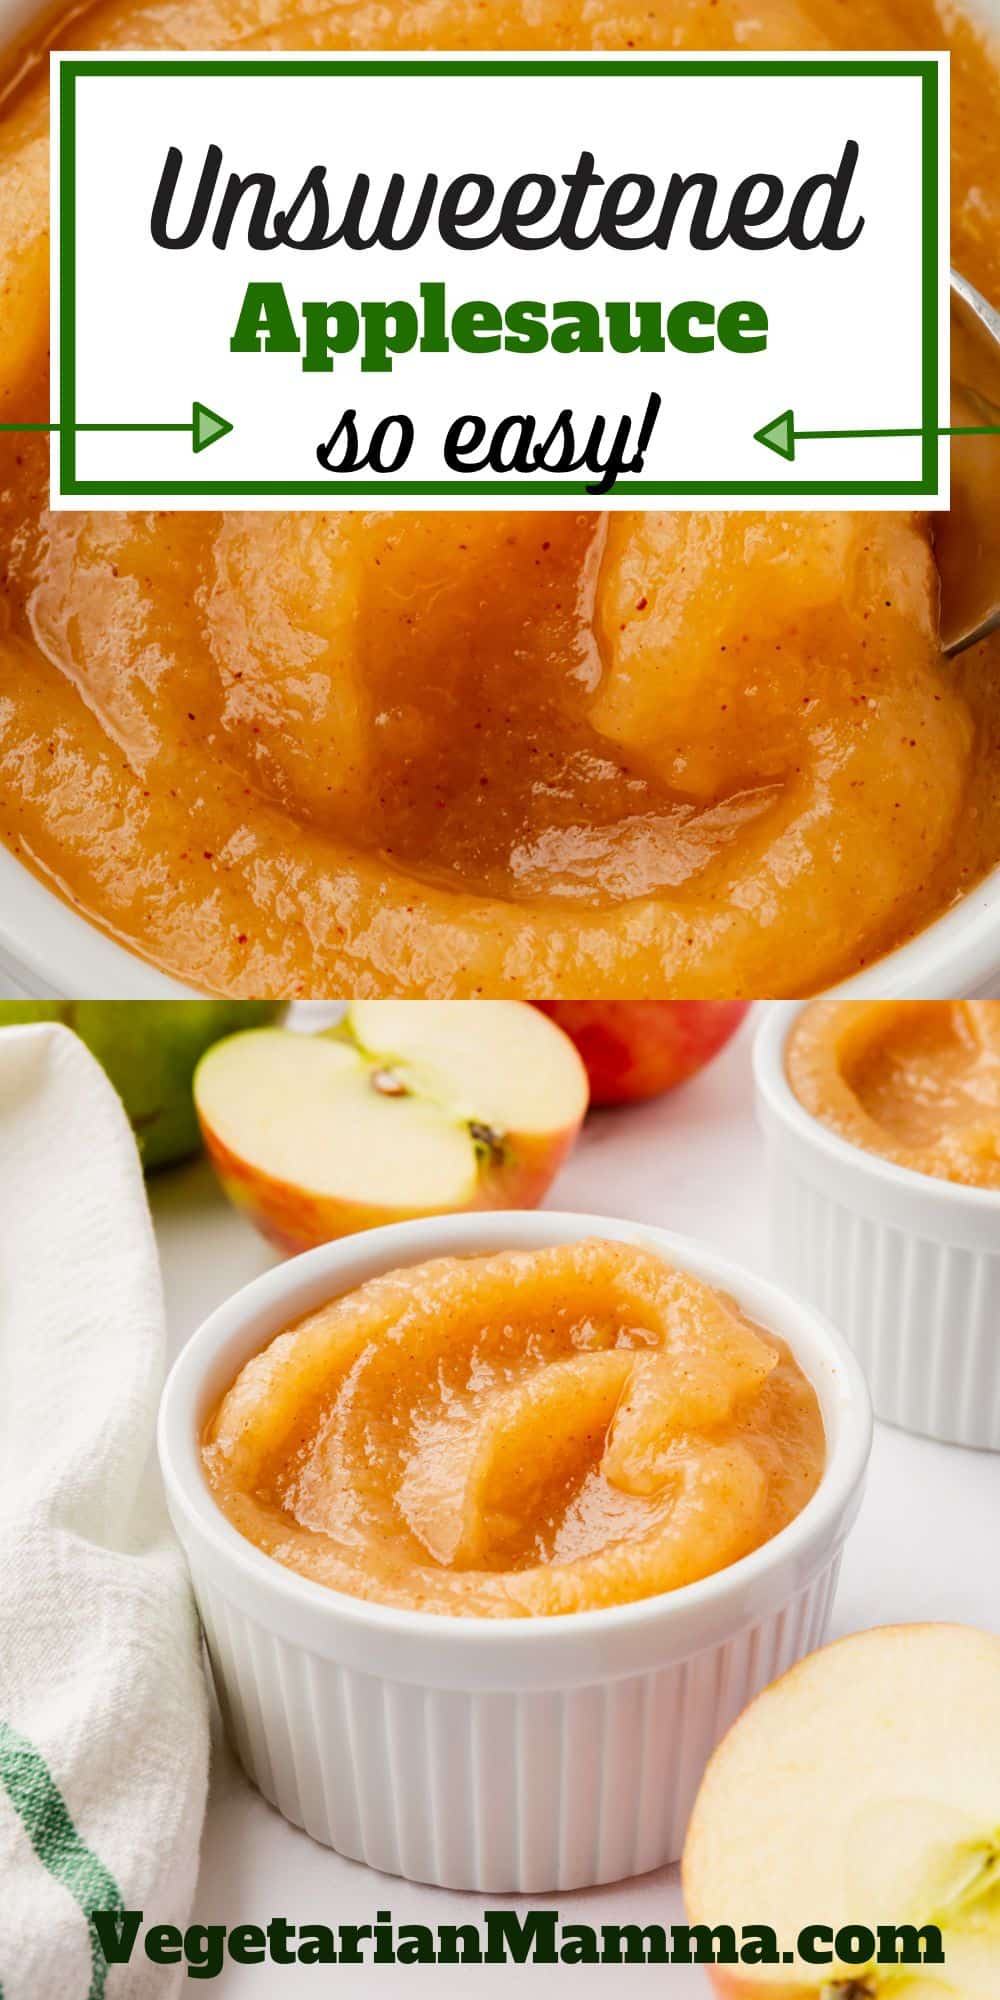 It is so simple to make your own Unsweetened Applesauce at home! It's simmered on the stove, and made with 3 ingredients in less than an hour.